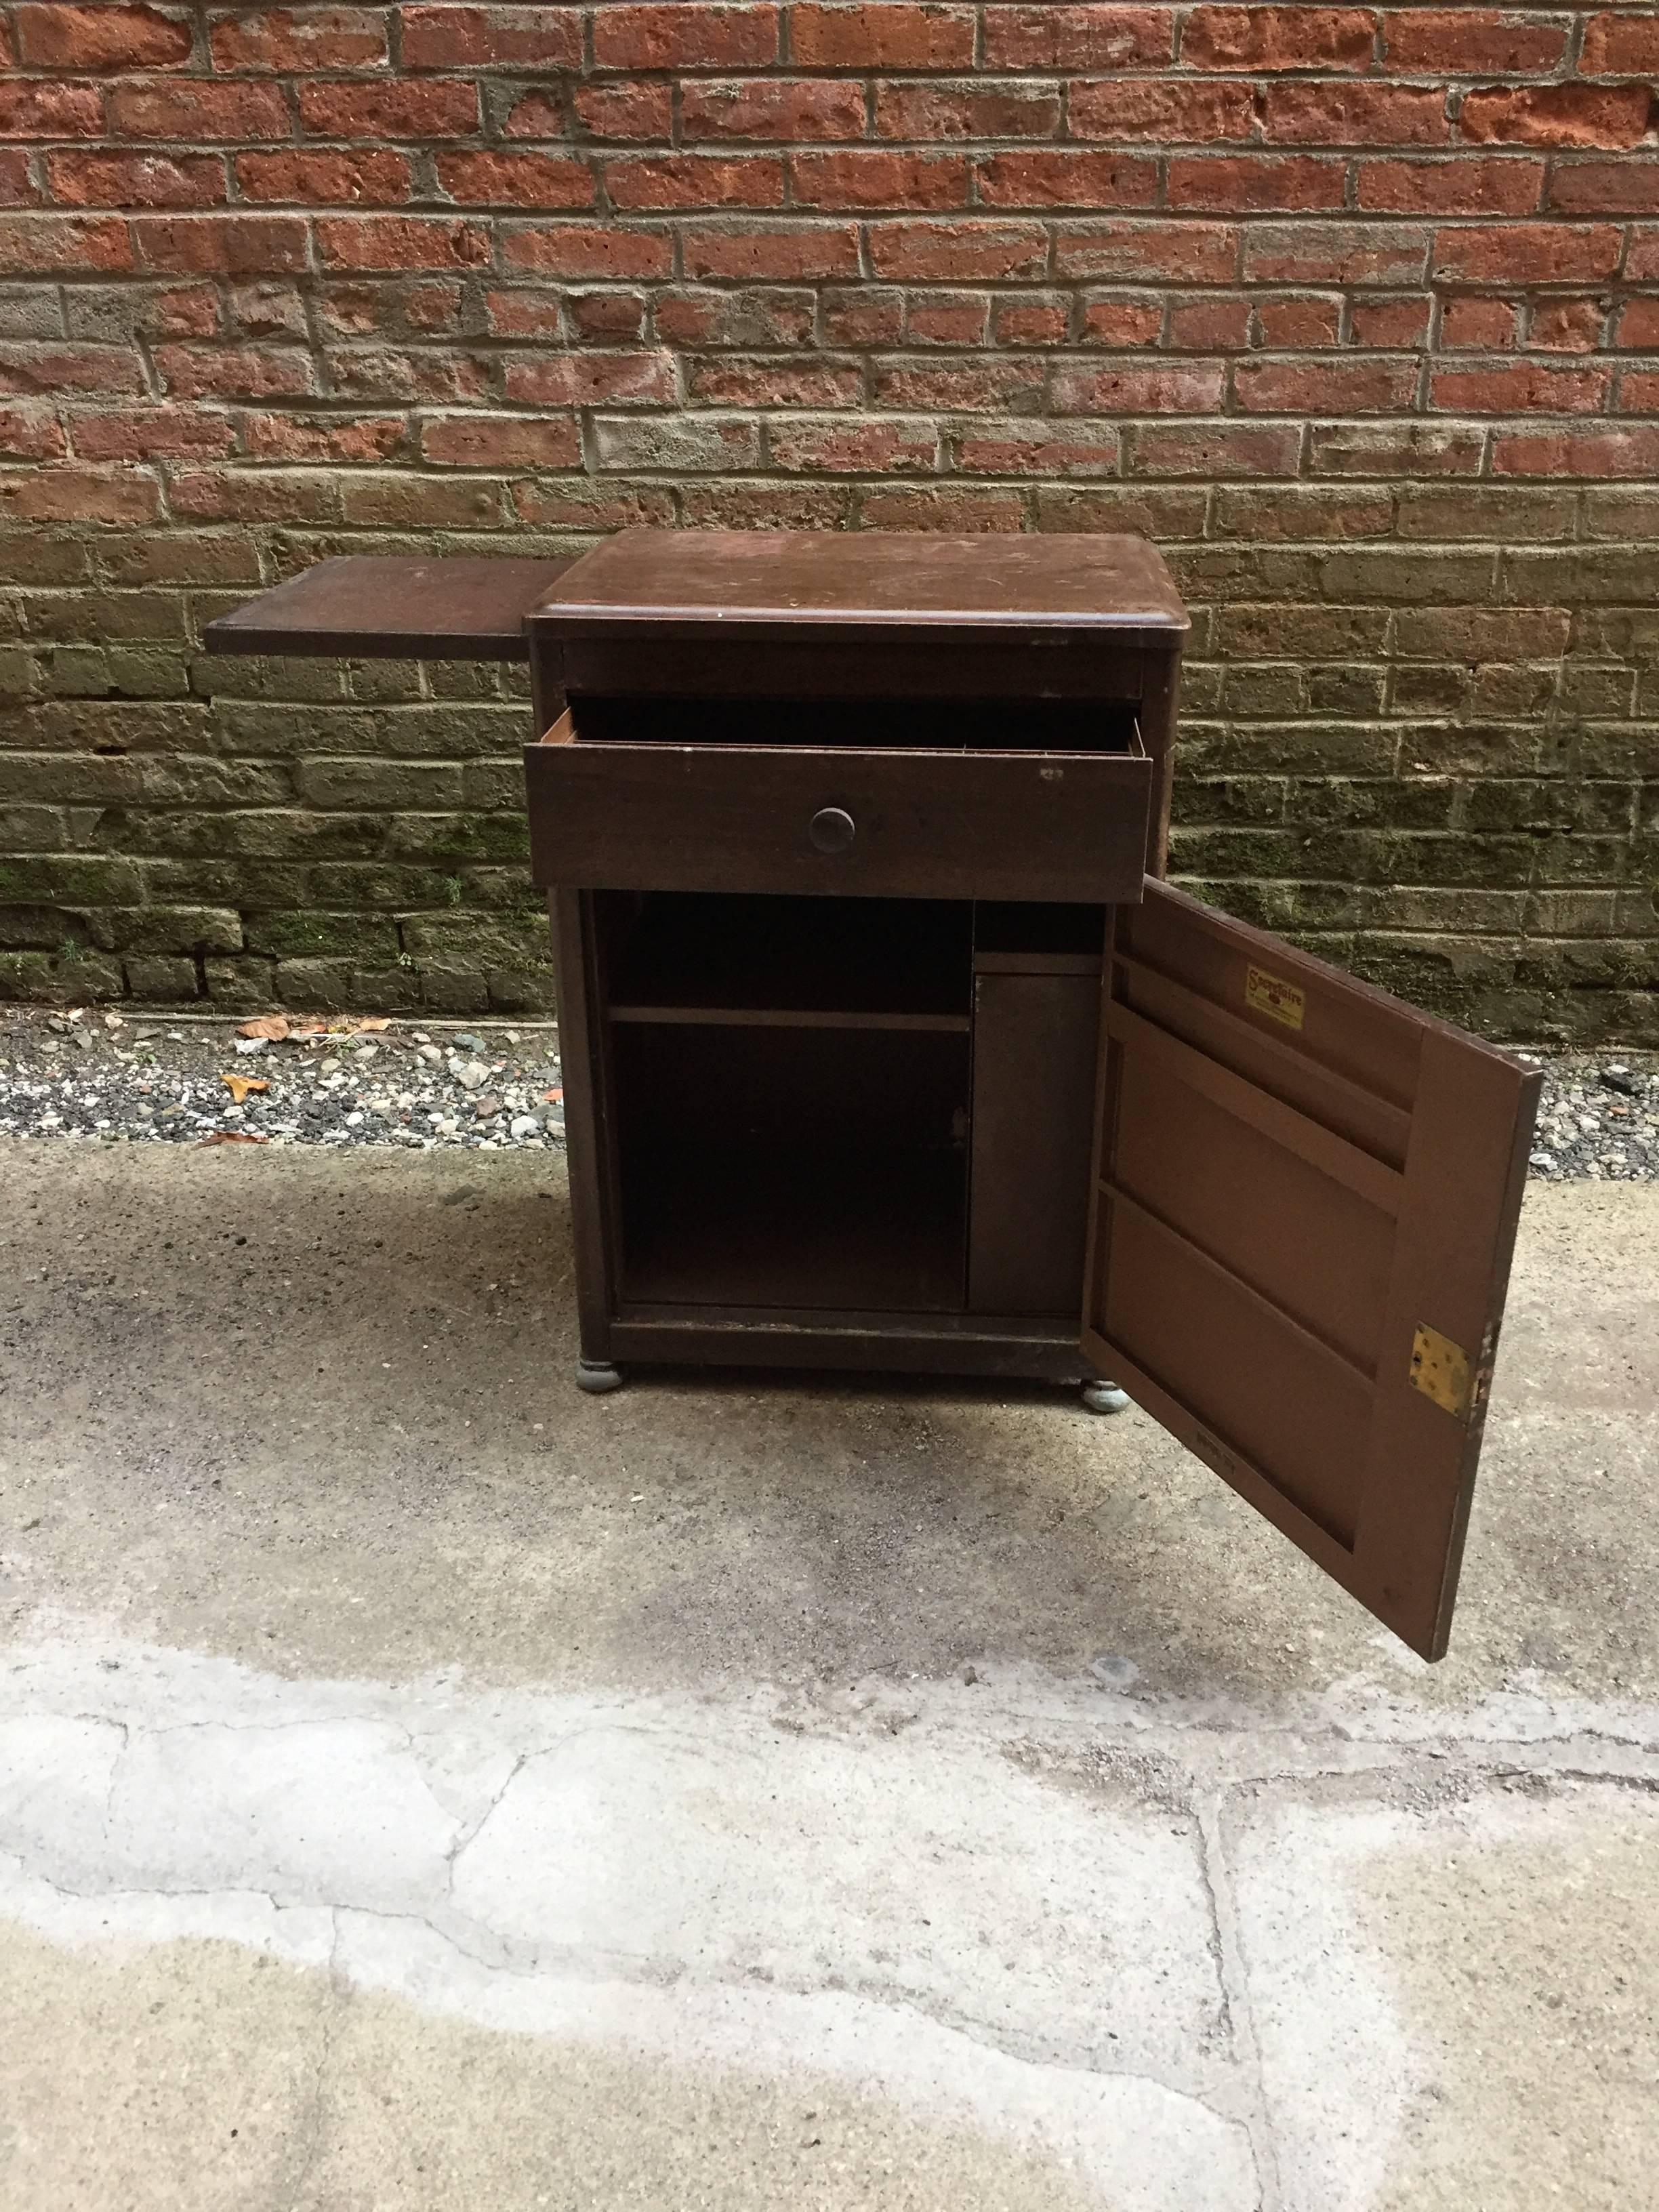 Spectacular metal fireproof cabinet by The General Fireproofing Co., Youngstown, Ohio, circa 1920-1930. The cabinet features a side pull out surface and great space for storage. Wood grain finish exterior over steel. Makes a great end table or